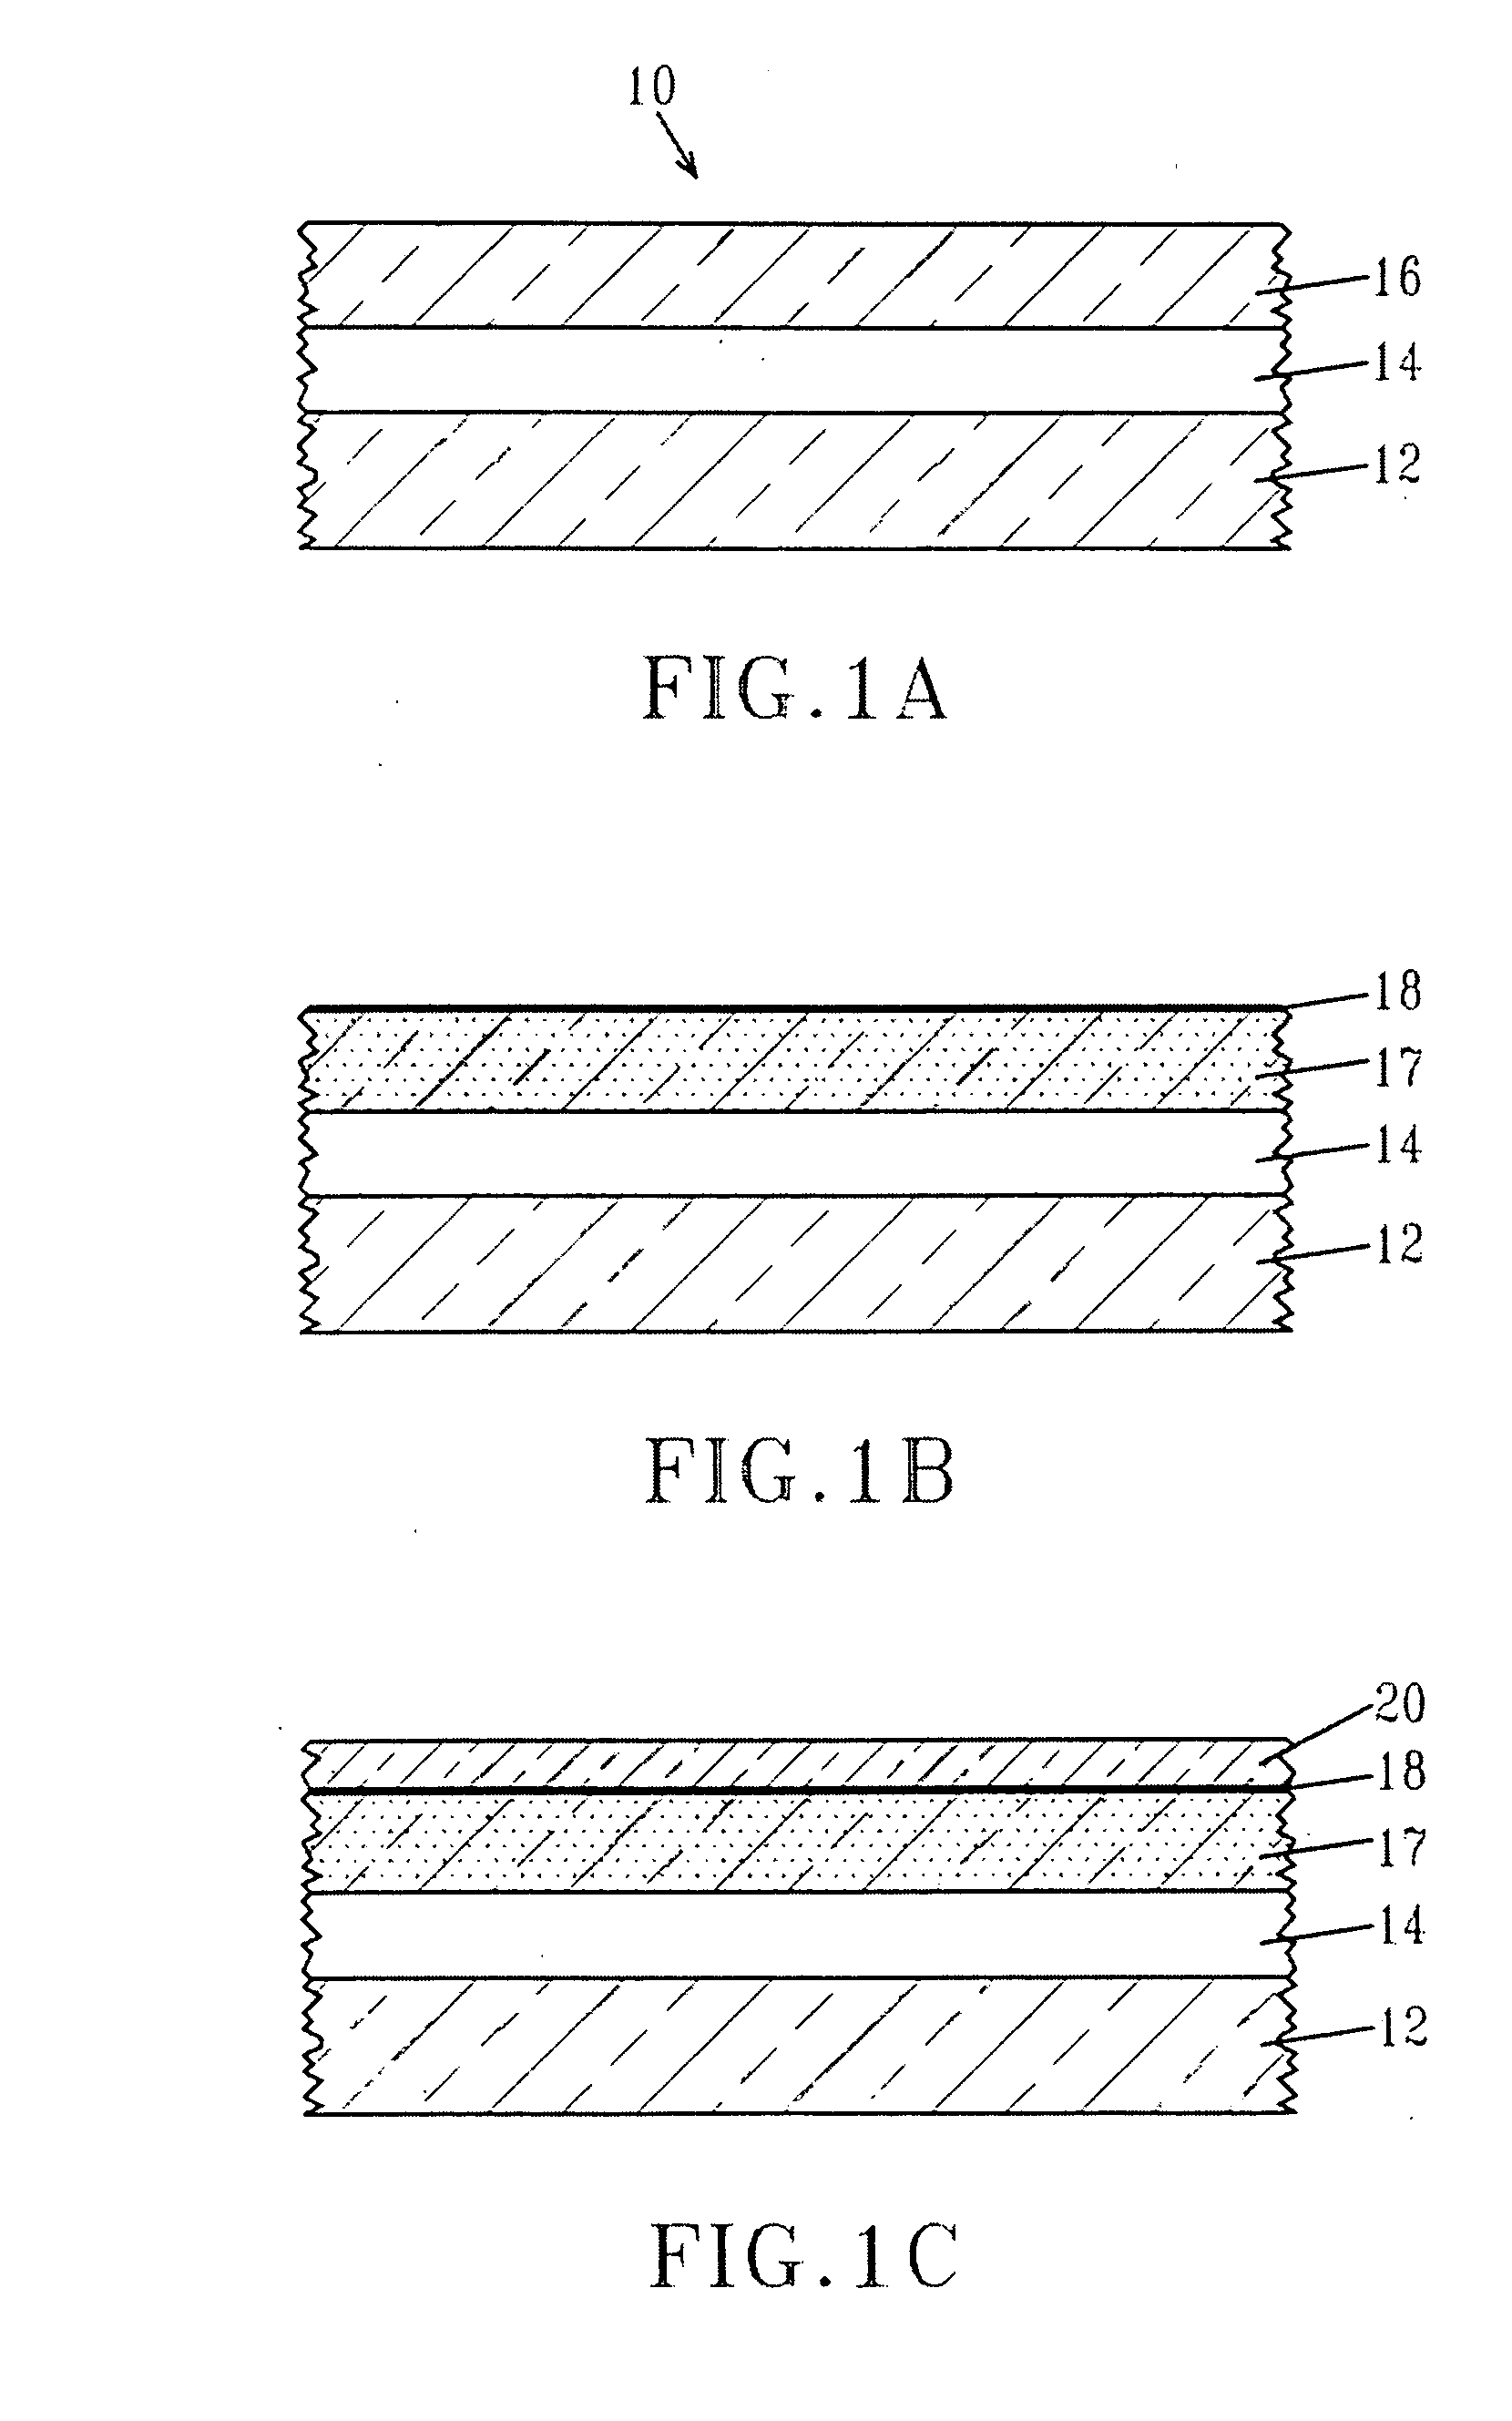 Manufacturable recessed strained RSD structure and process for advanced CMOS